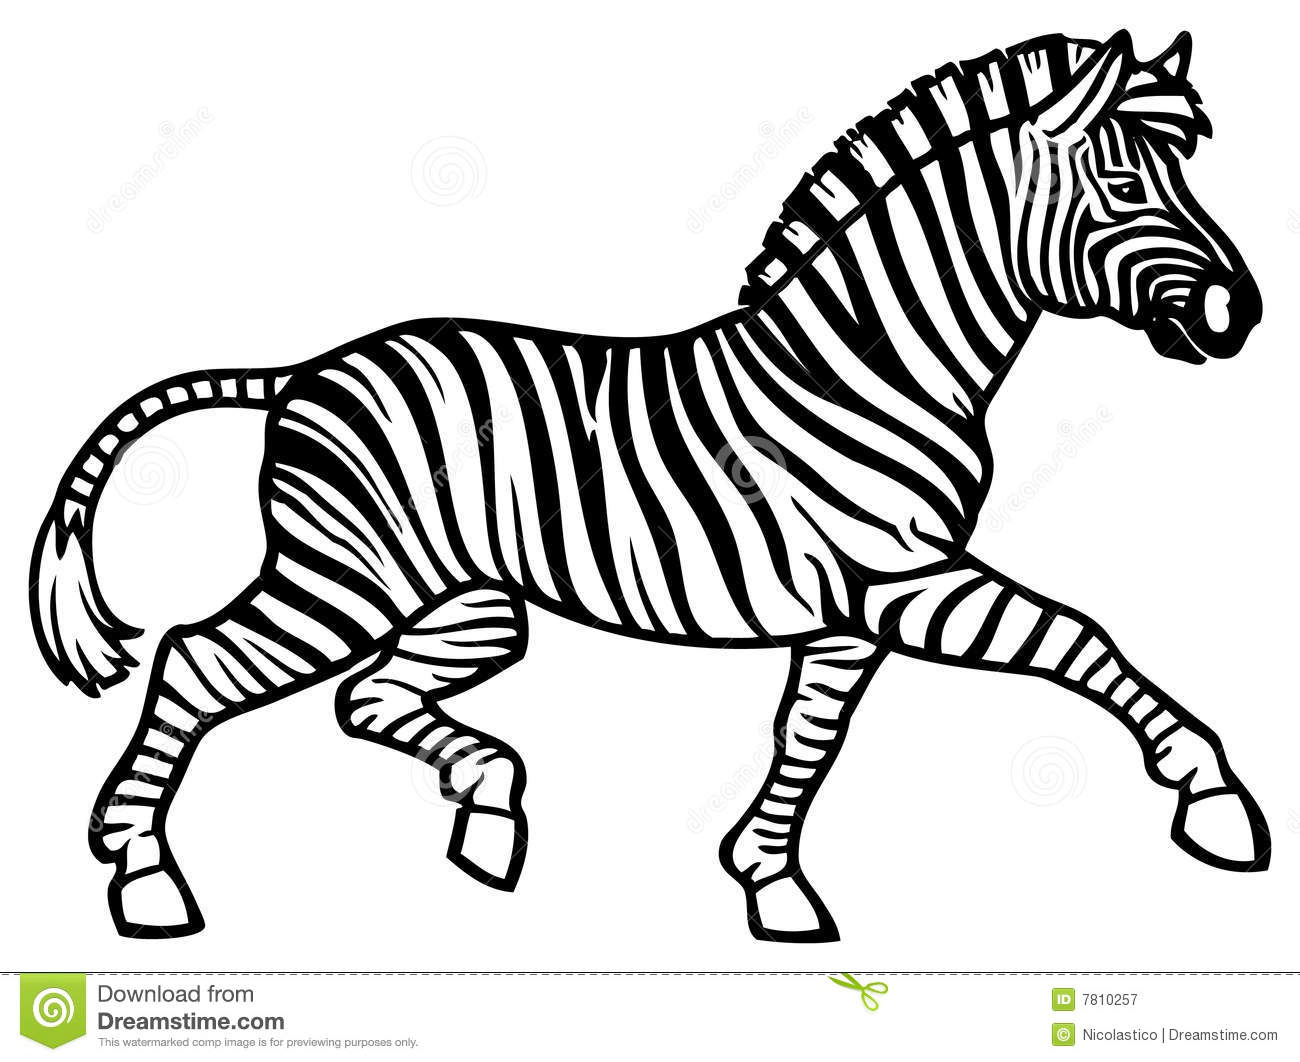 Image gallery for : zebra black and white drawing